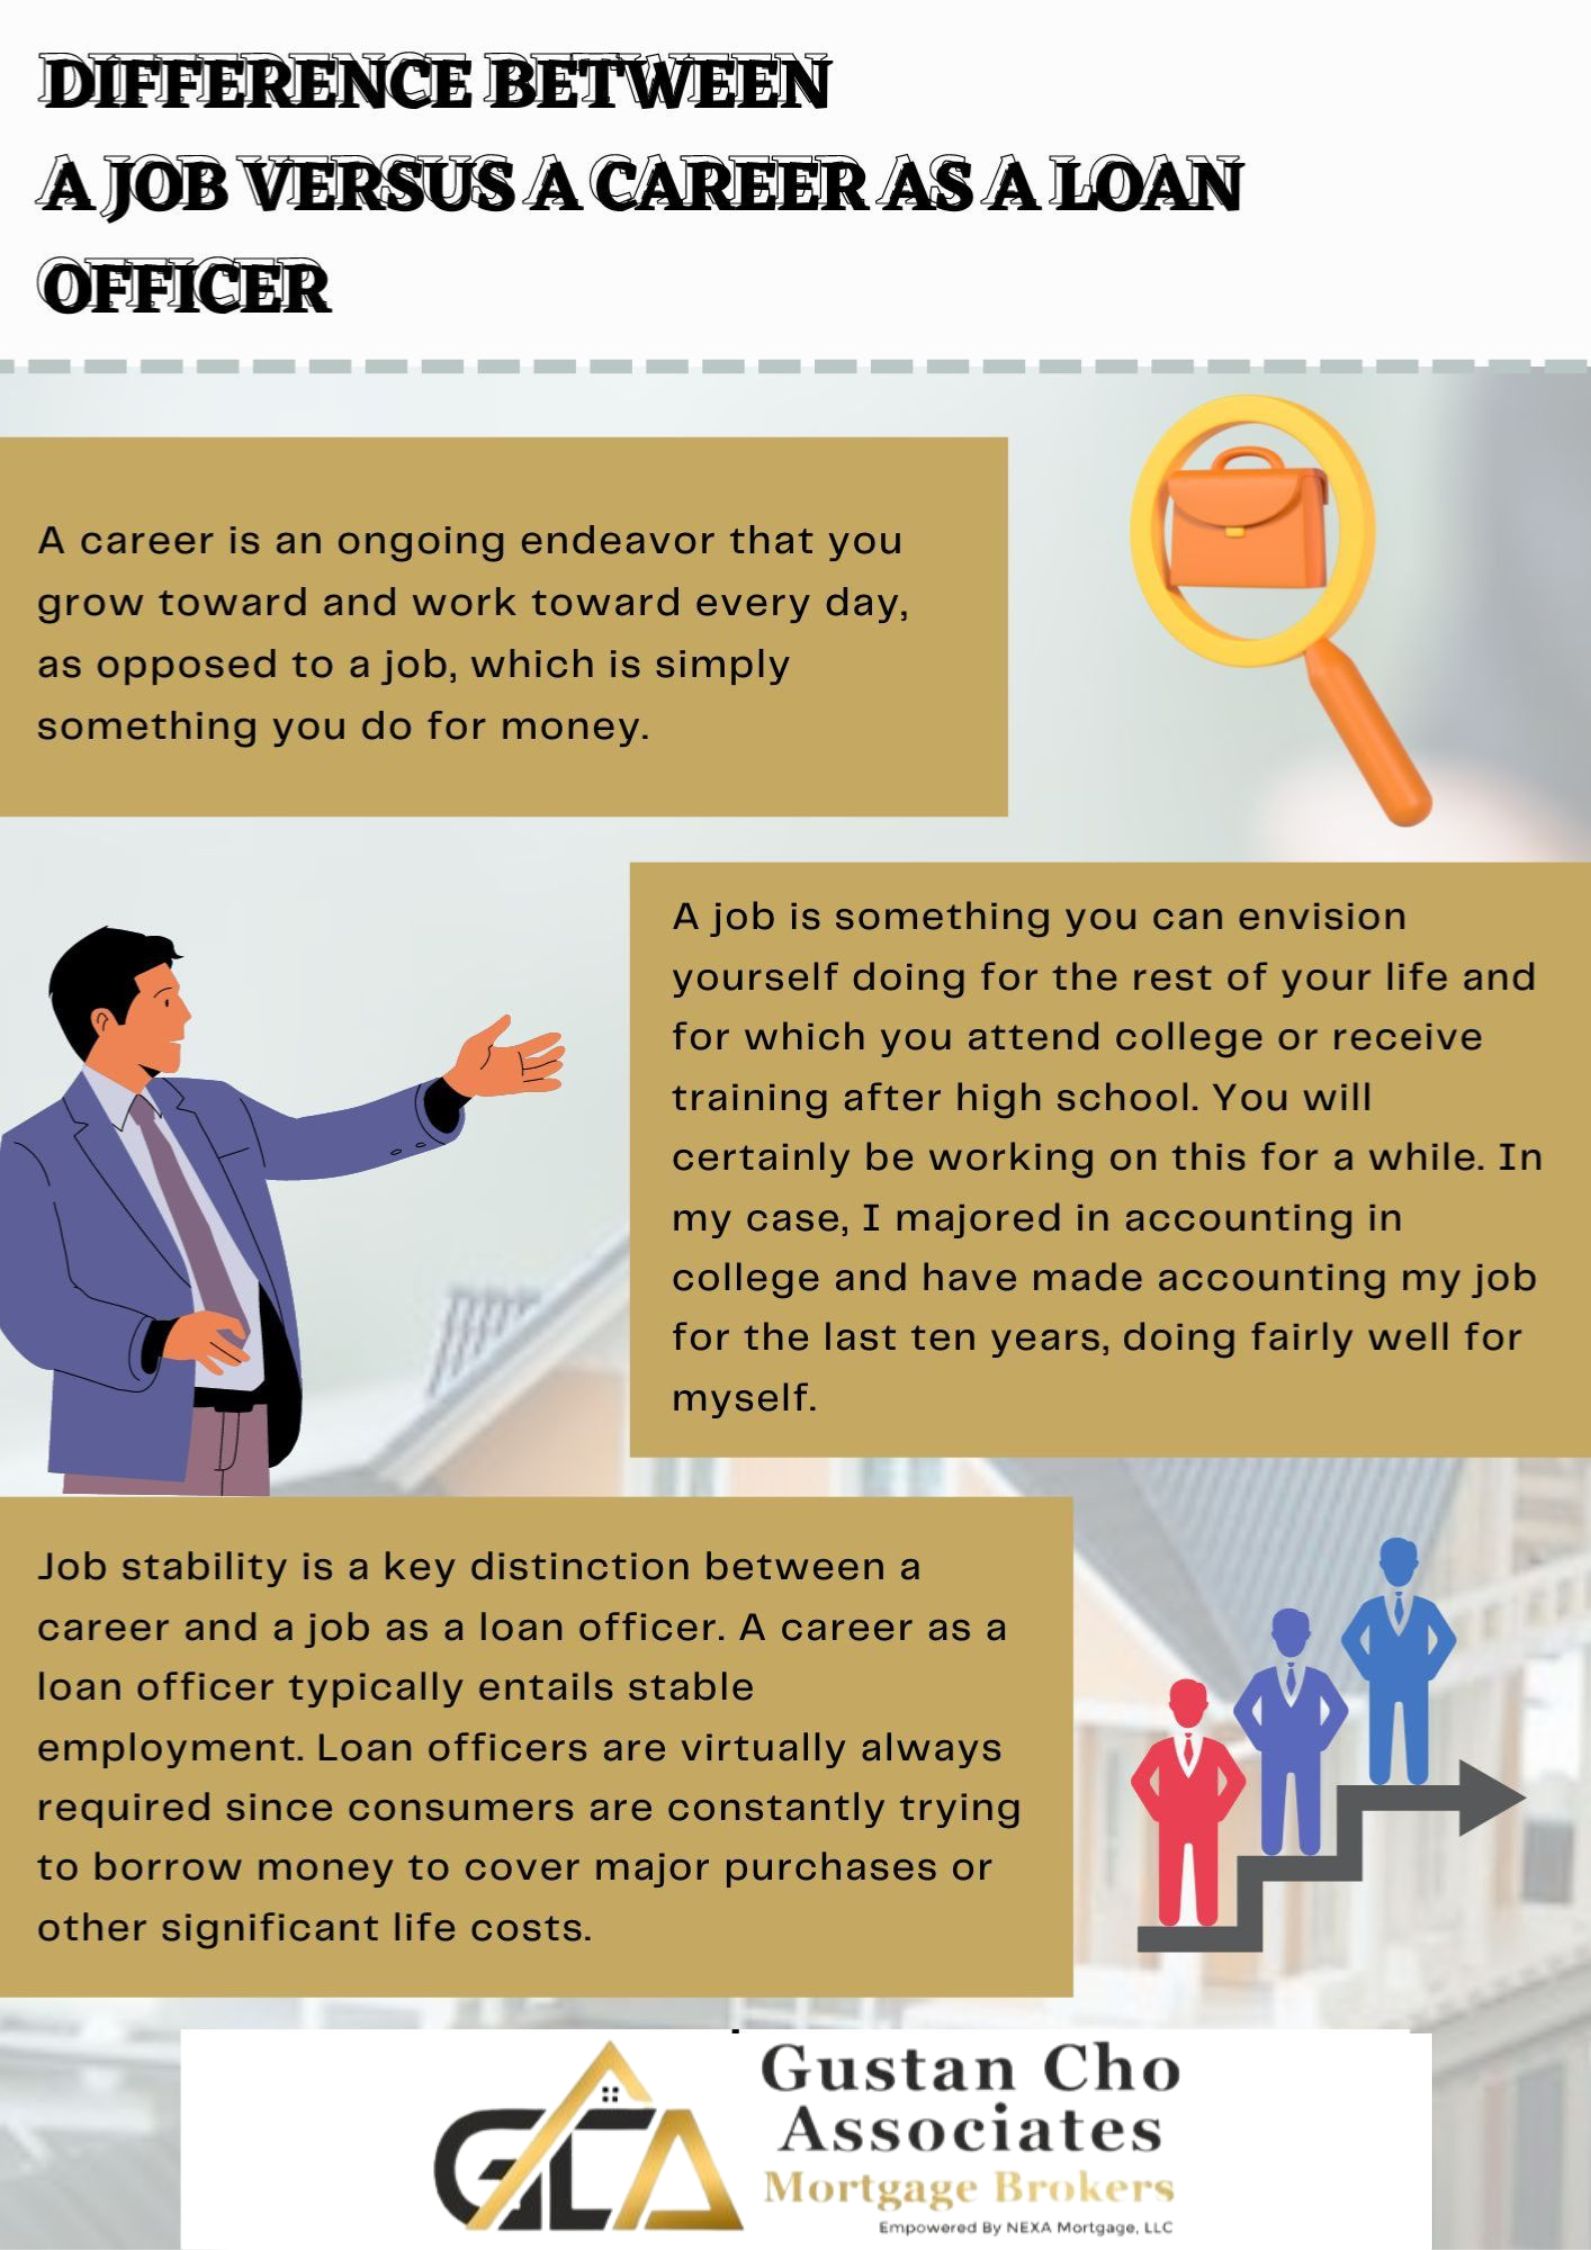 Difference Between a Job Versus a Career As a Loan Officer